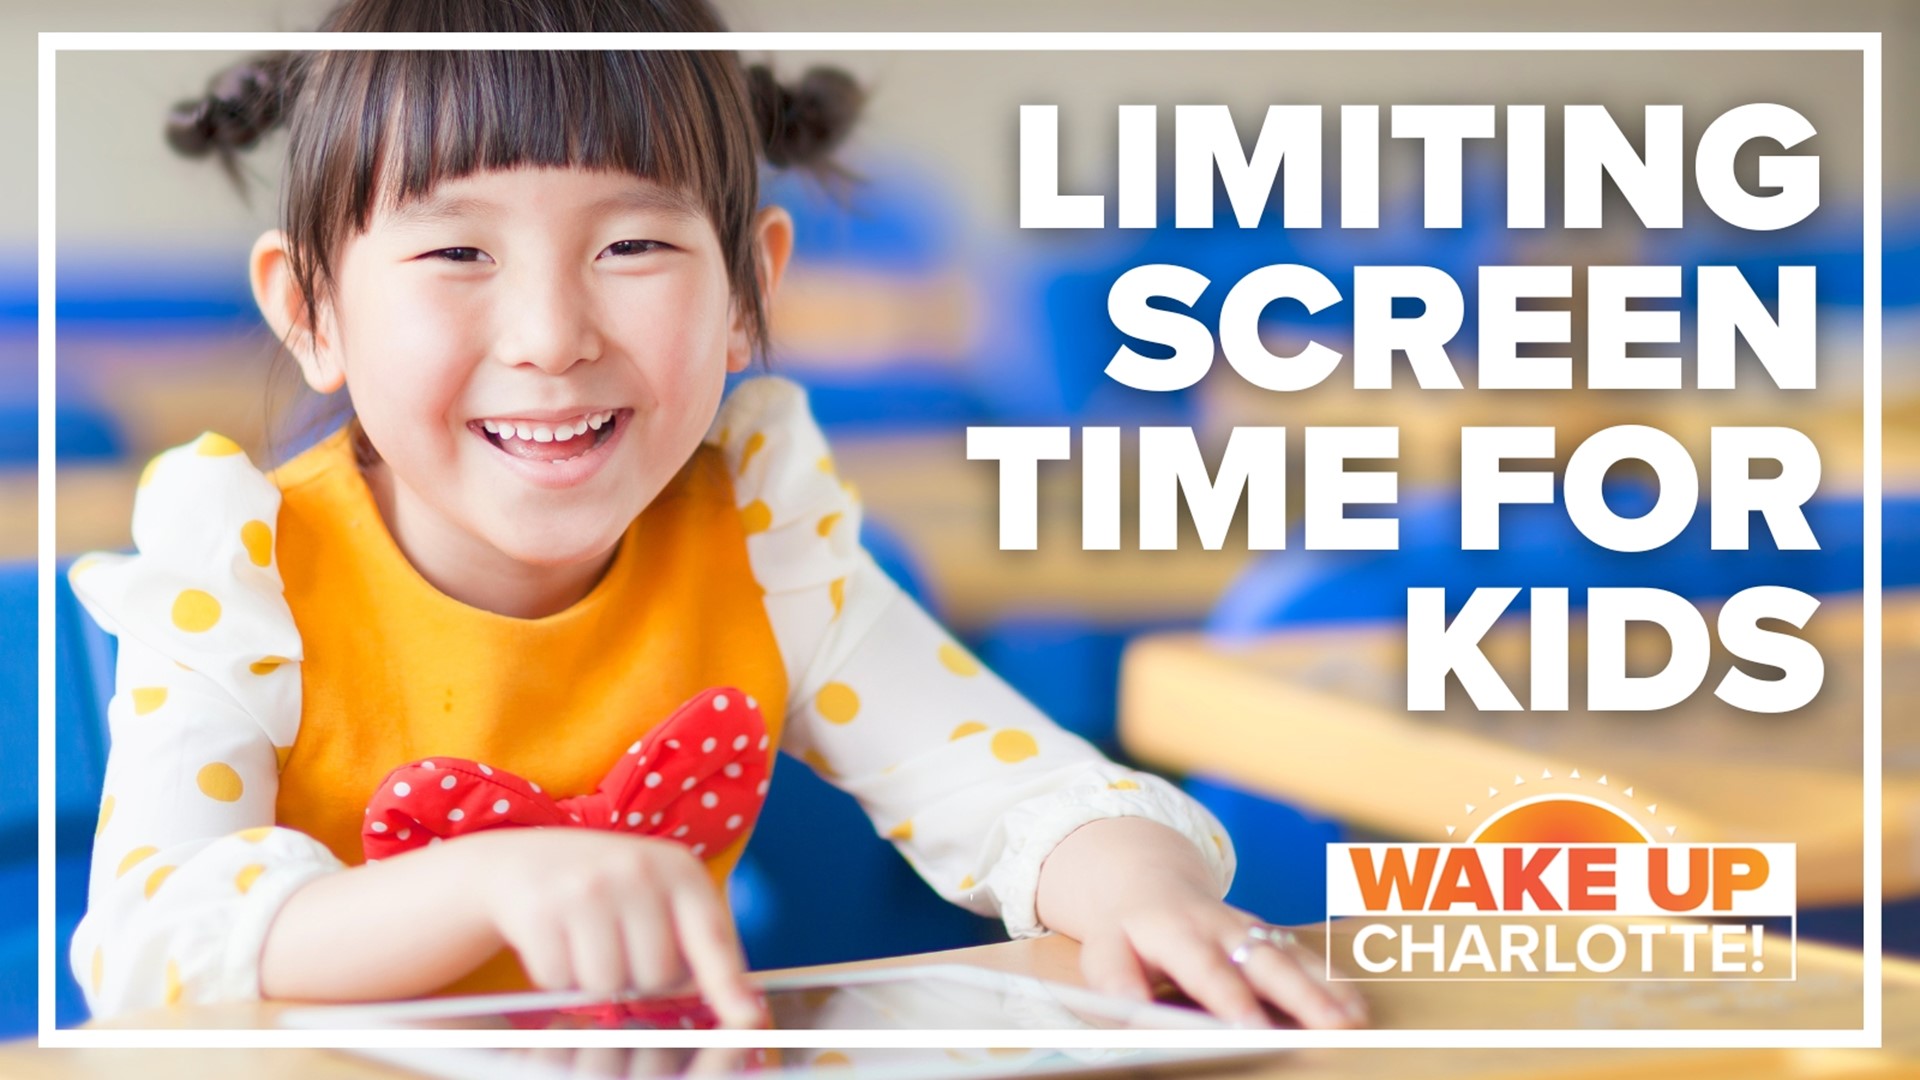 The Kaiser Family Foundation said kids ages 8 to 18 spend more than seven hours a day in front of a screen, just for entertainment purposes.